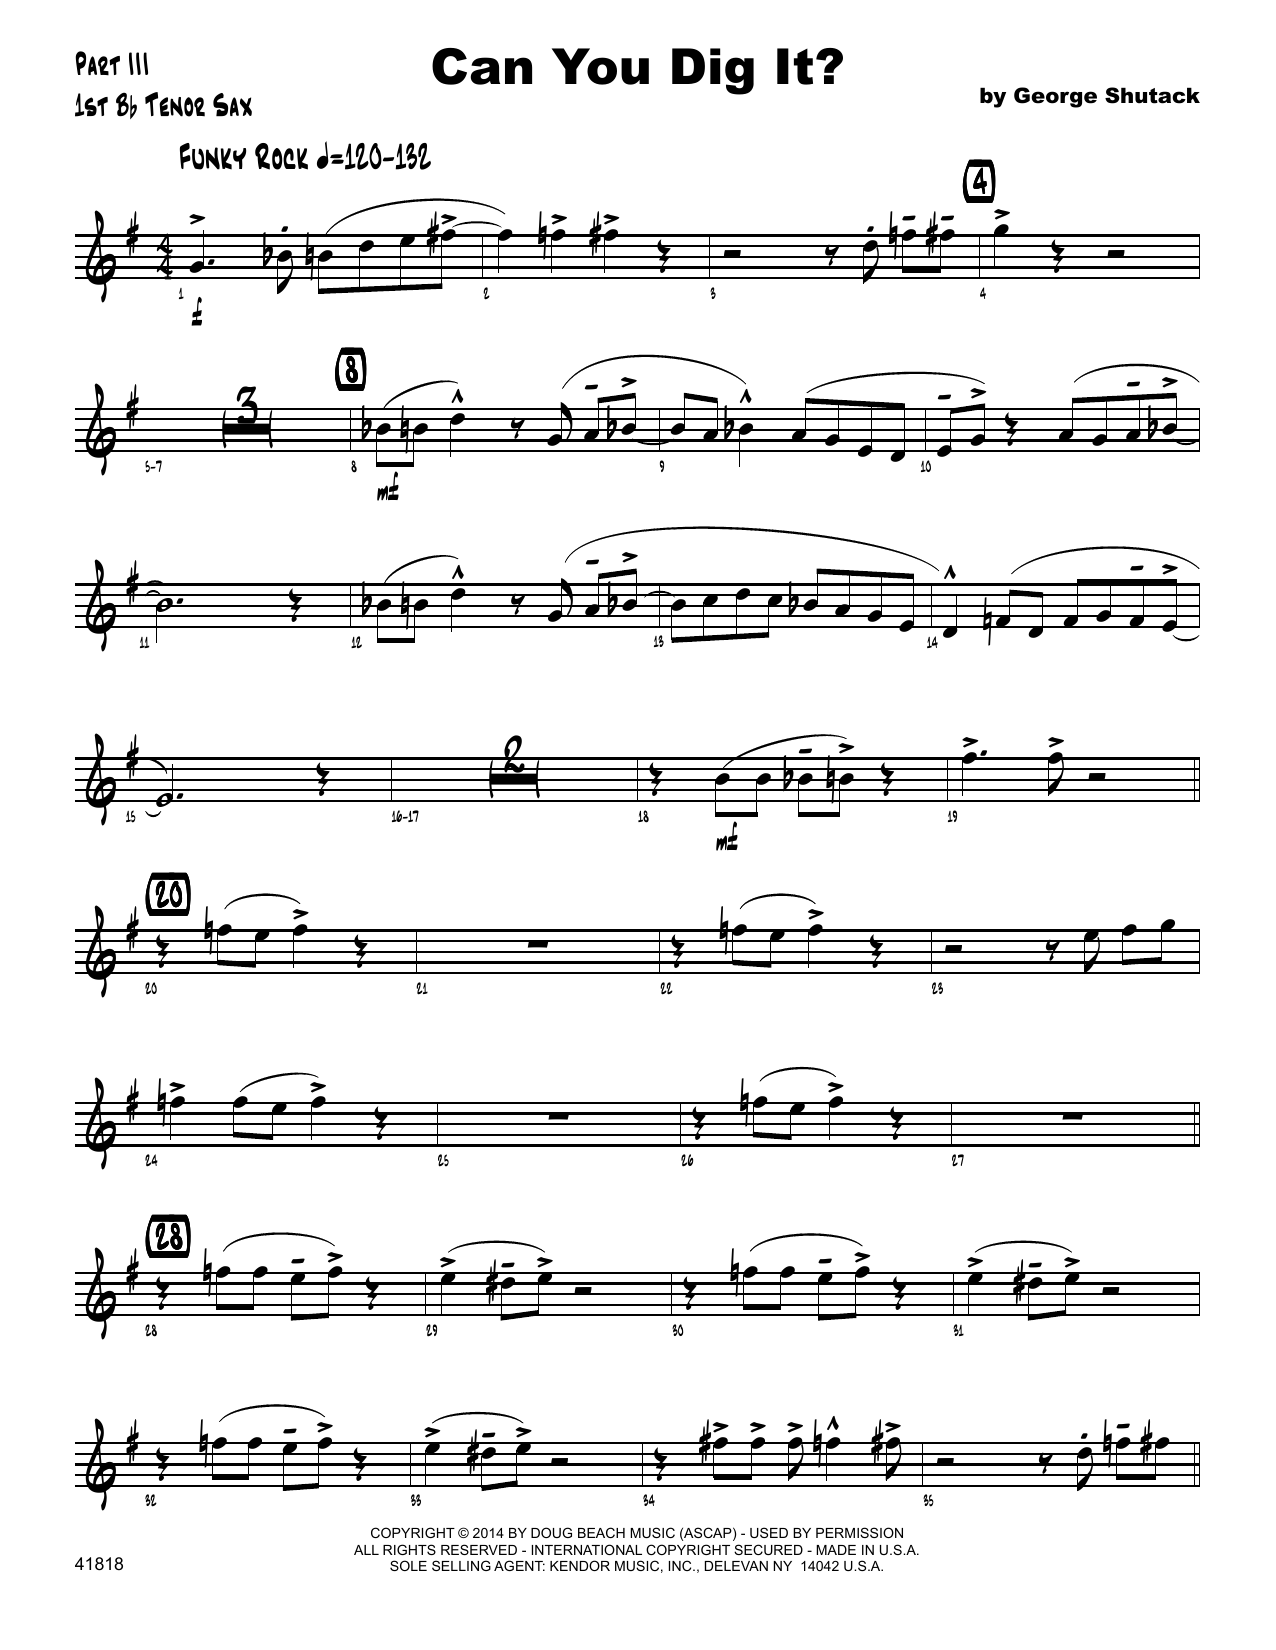 Download George Shutack Can You Dig It? - 1st Tenor Saxophone Sheet Music